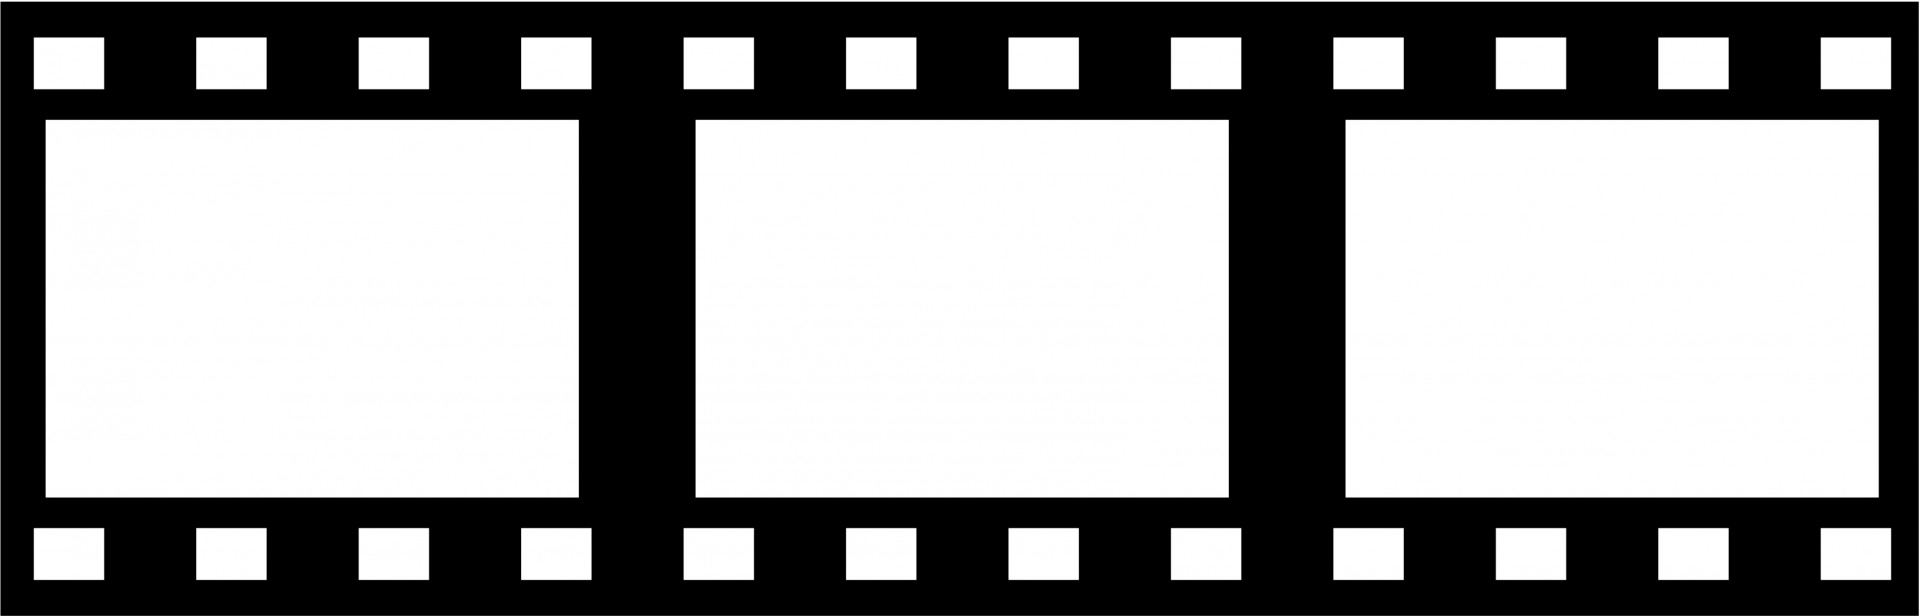 Free Filmstrip Cliparts, Download Free Clip Art, Free Clip Art on.